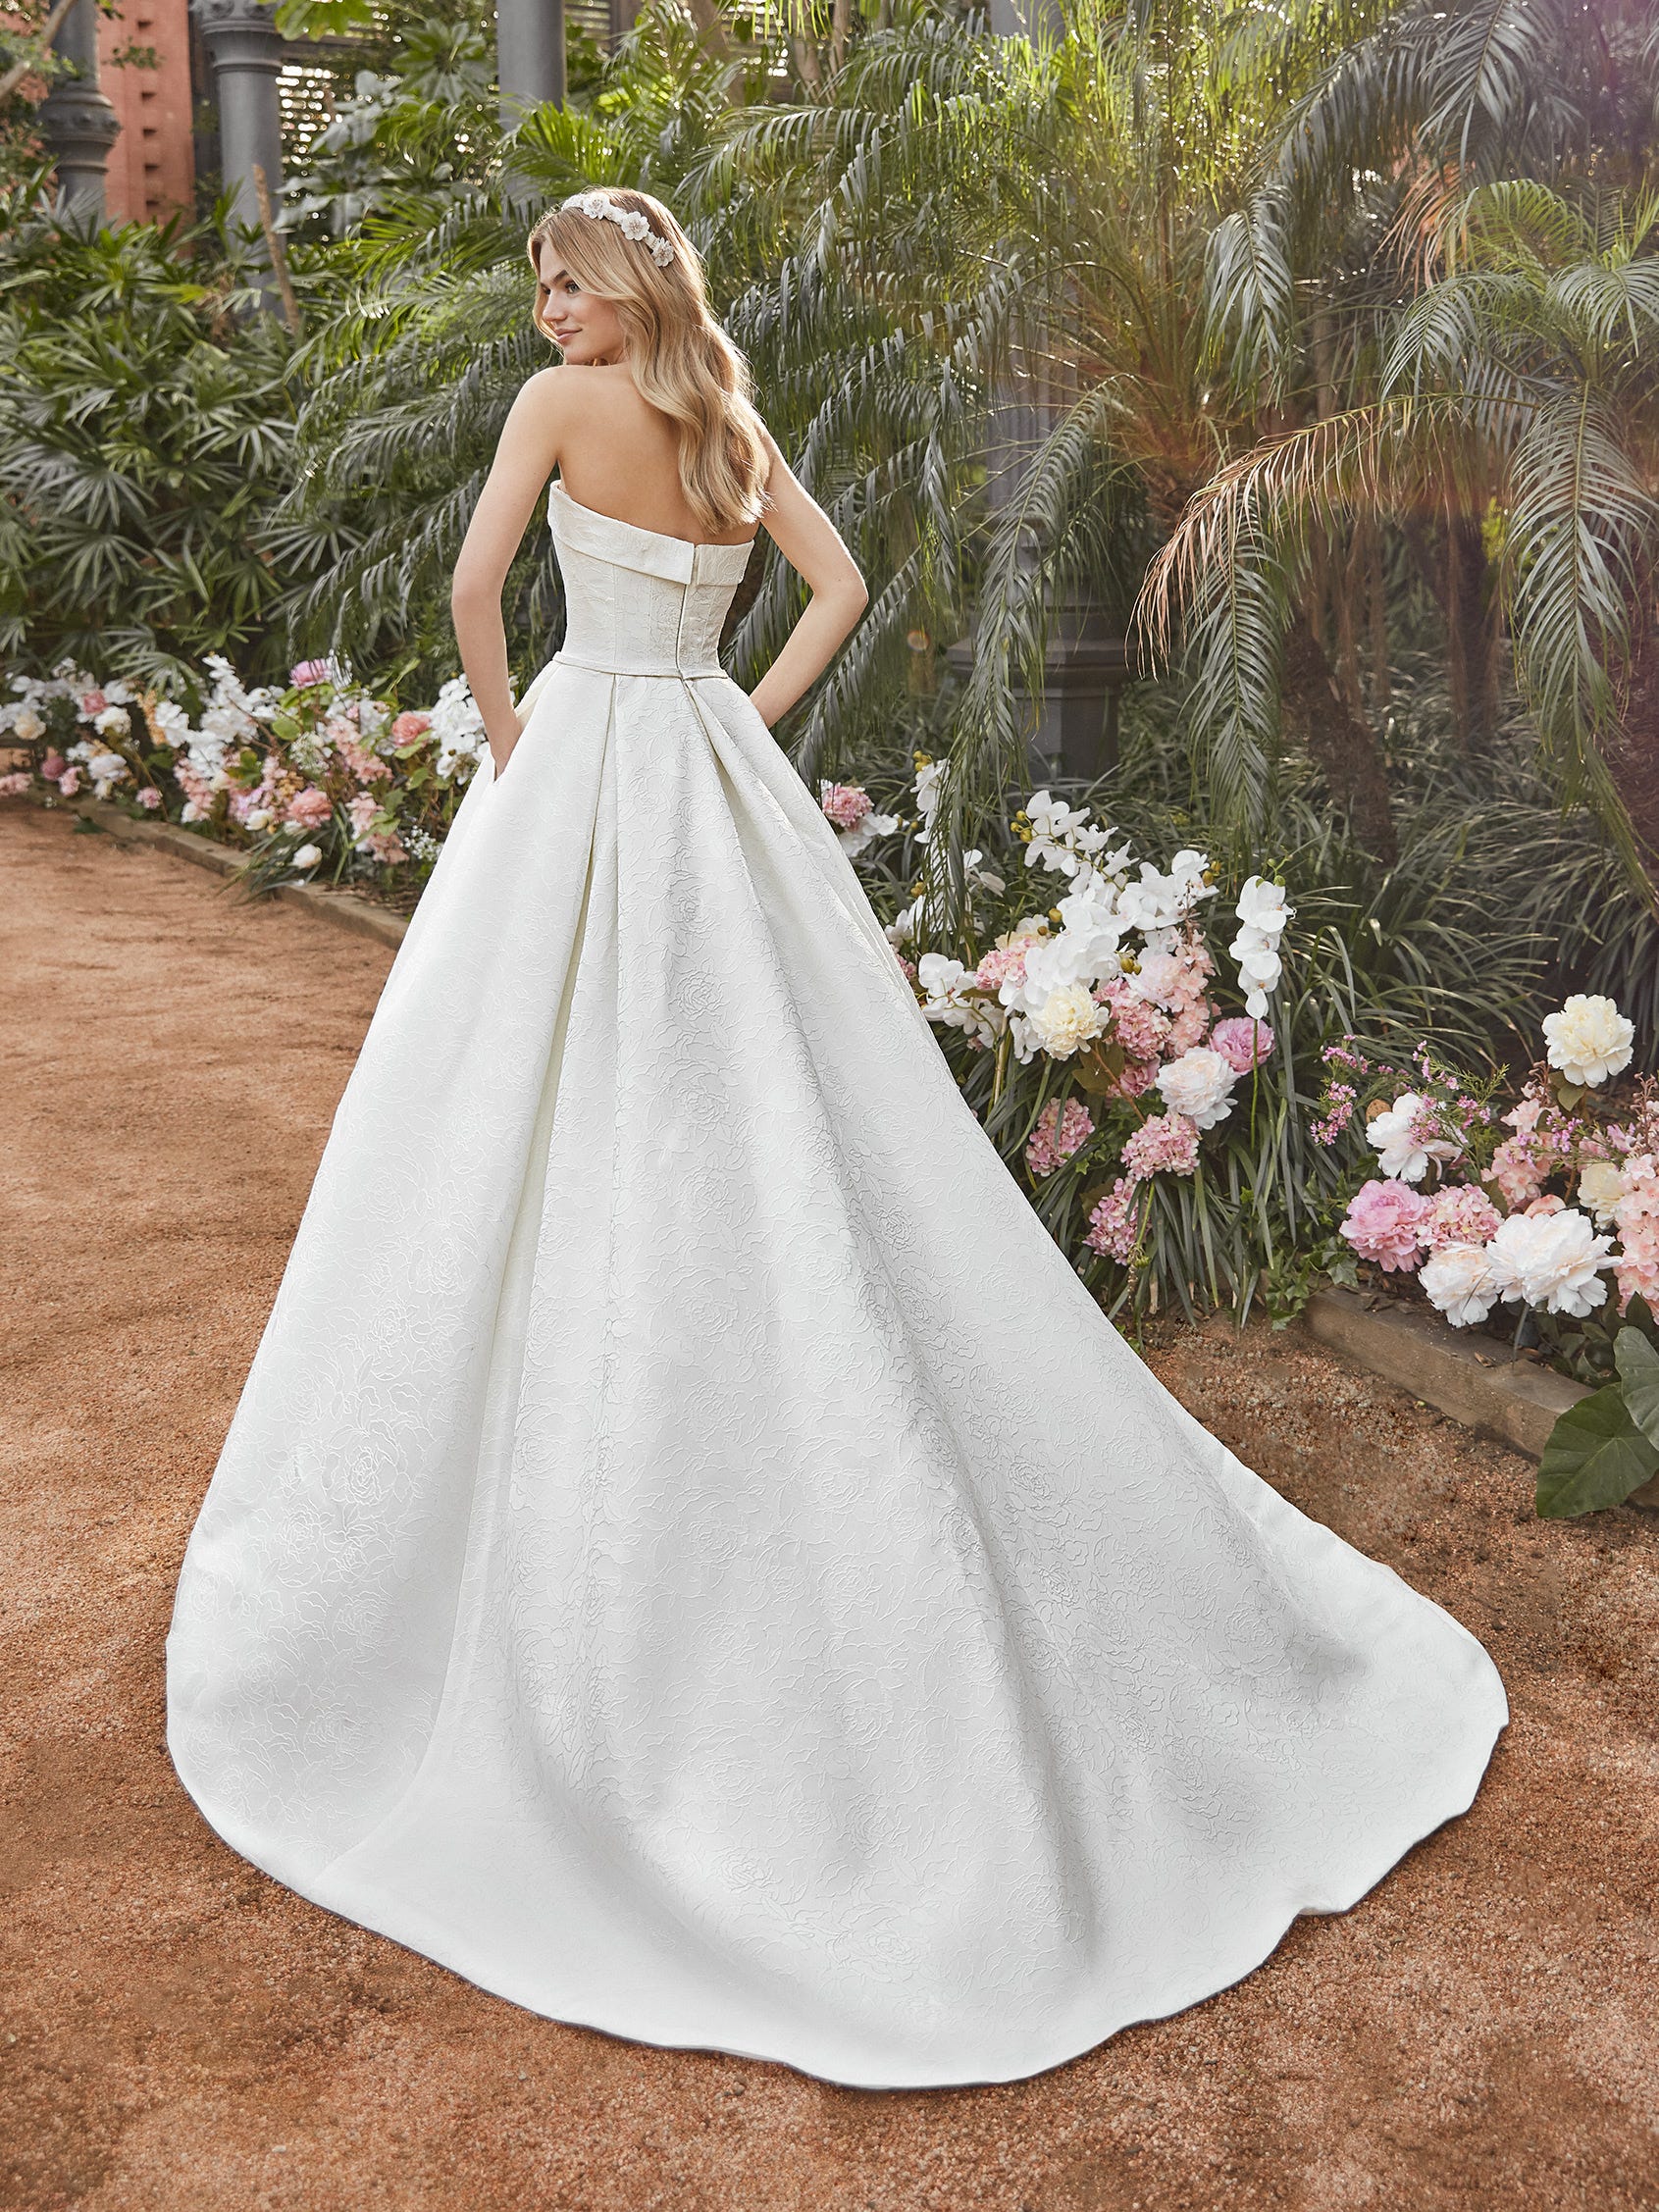 Discover The Wedding Dress Trends For 2021